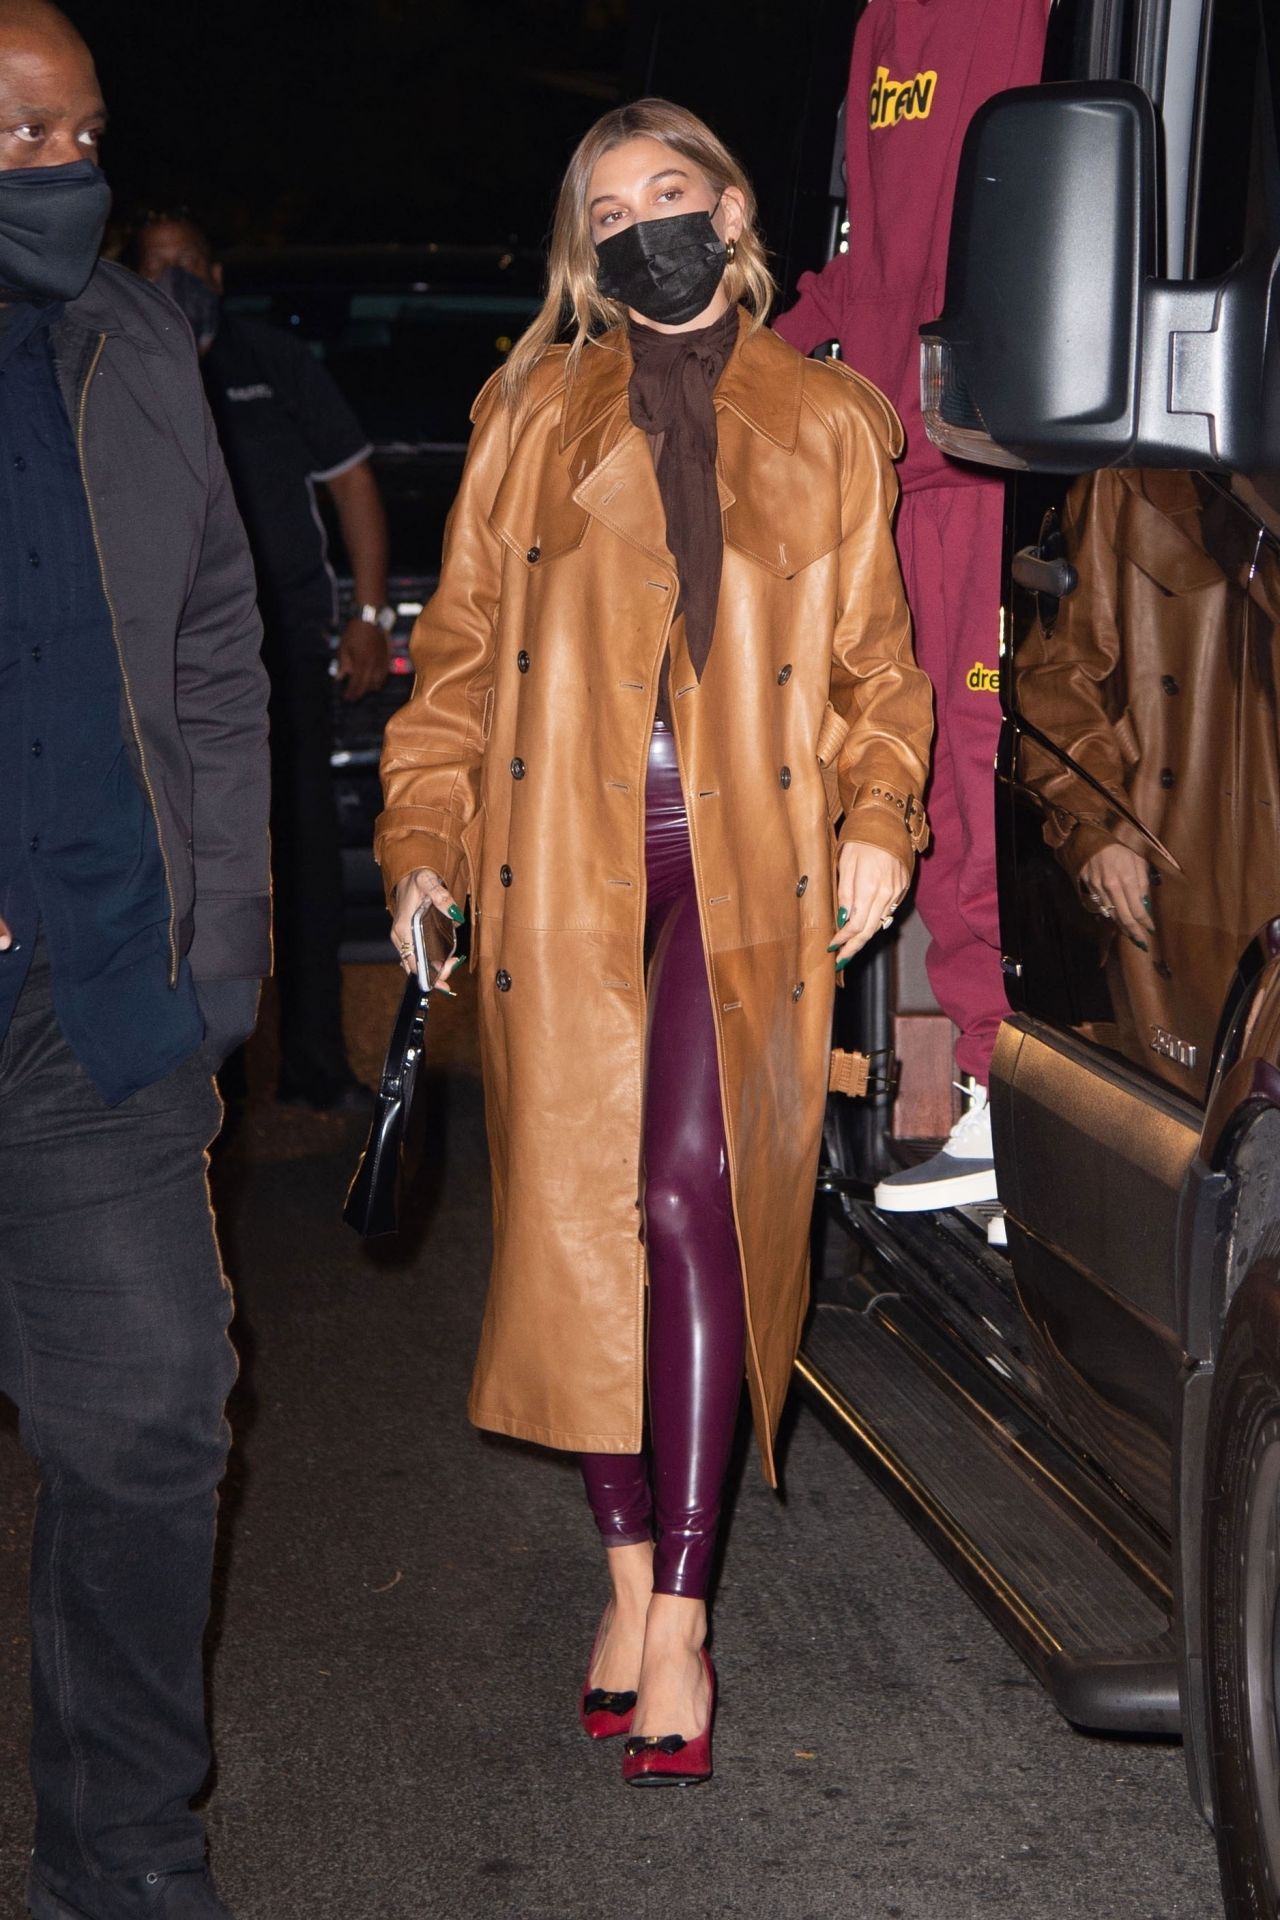 hailey-bieber-and-justin-bieber-night-out-new-york-city-10-15-2020-7.jpg